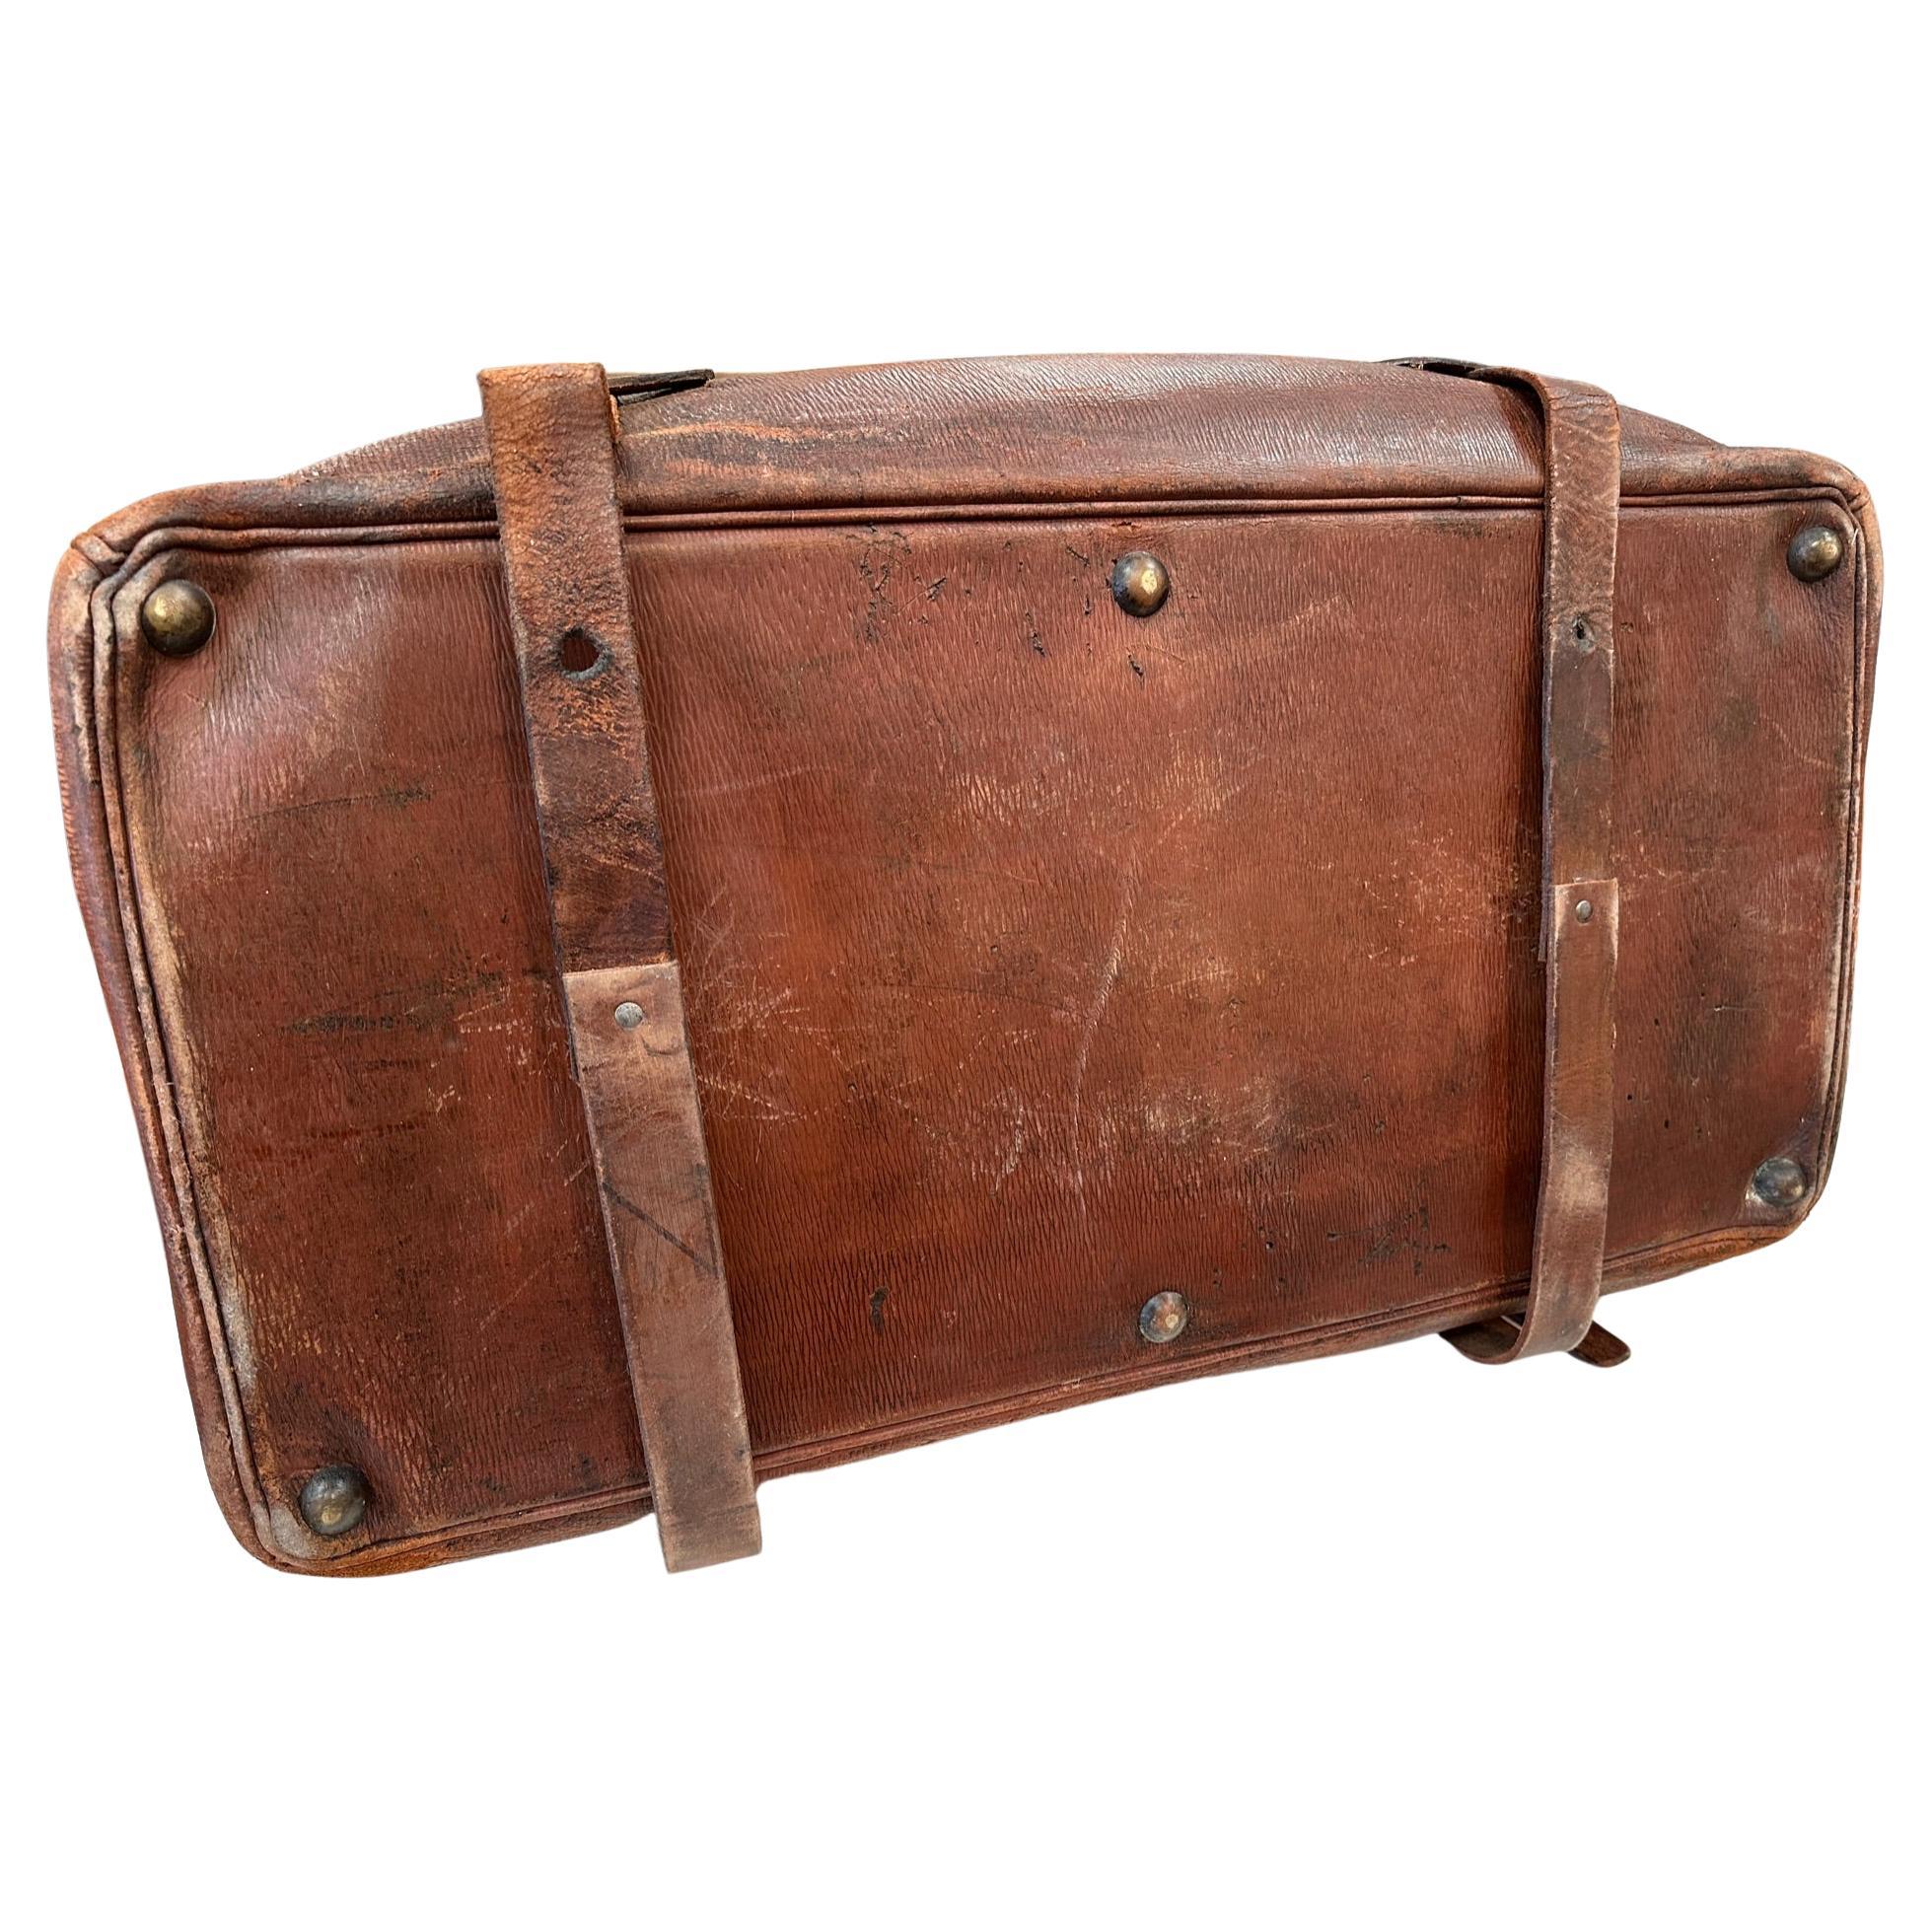 This beautiful 19th Century large scale Antique leather traveling bag or luggage is truly a special piece.  The bag opens and all of the brass hardware is in working condition. The bag is in the shape of a Dr's medicine bag but much larger - like a